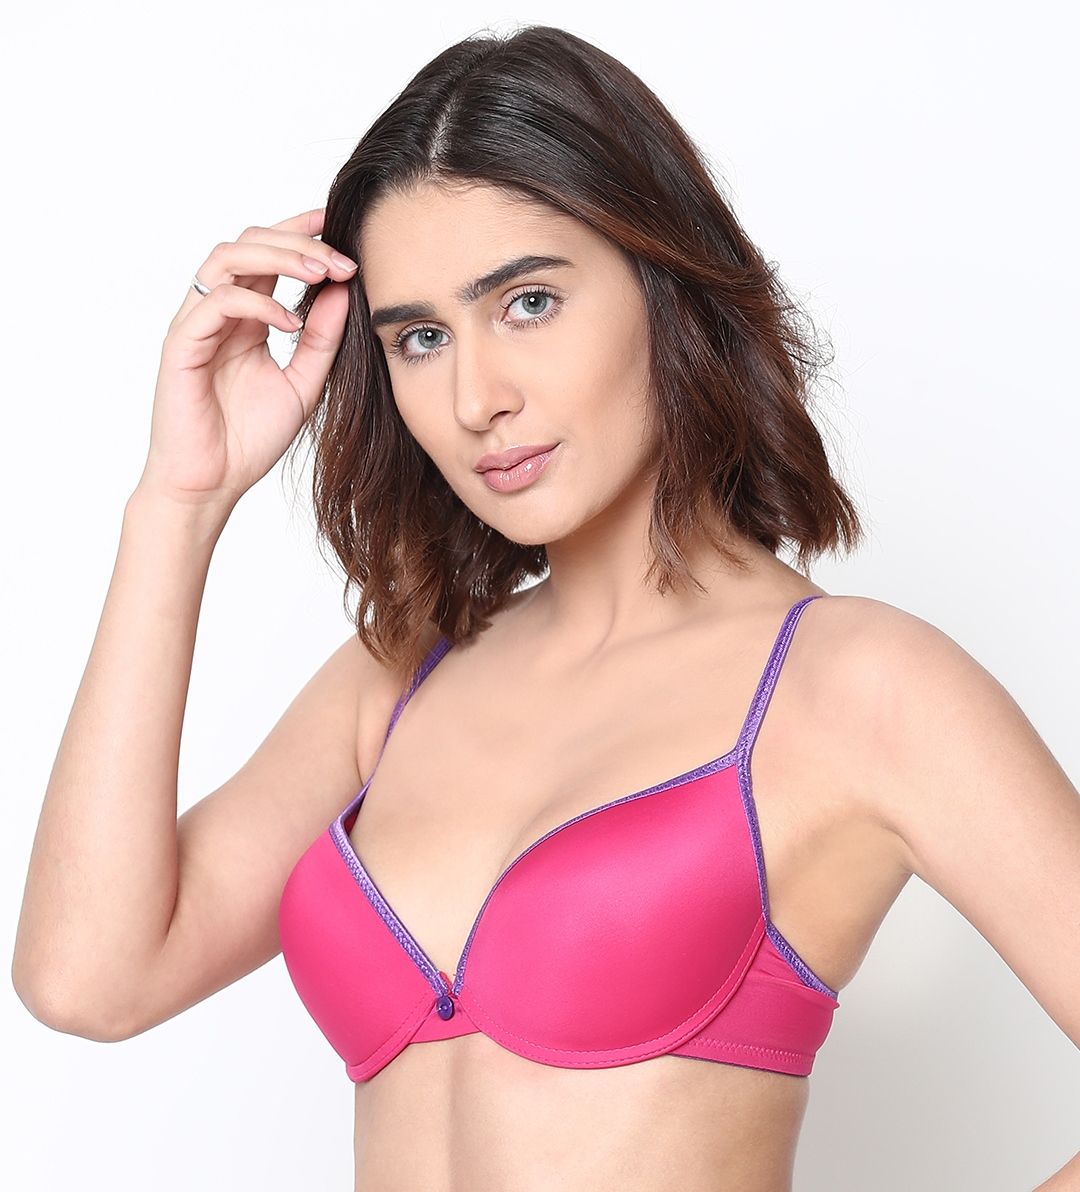 https://images-static.nykaa.com/media/catalog/product/a/0/a08d830sc077-pinkviolet_1_a.jpg